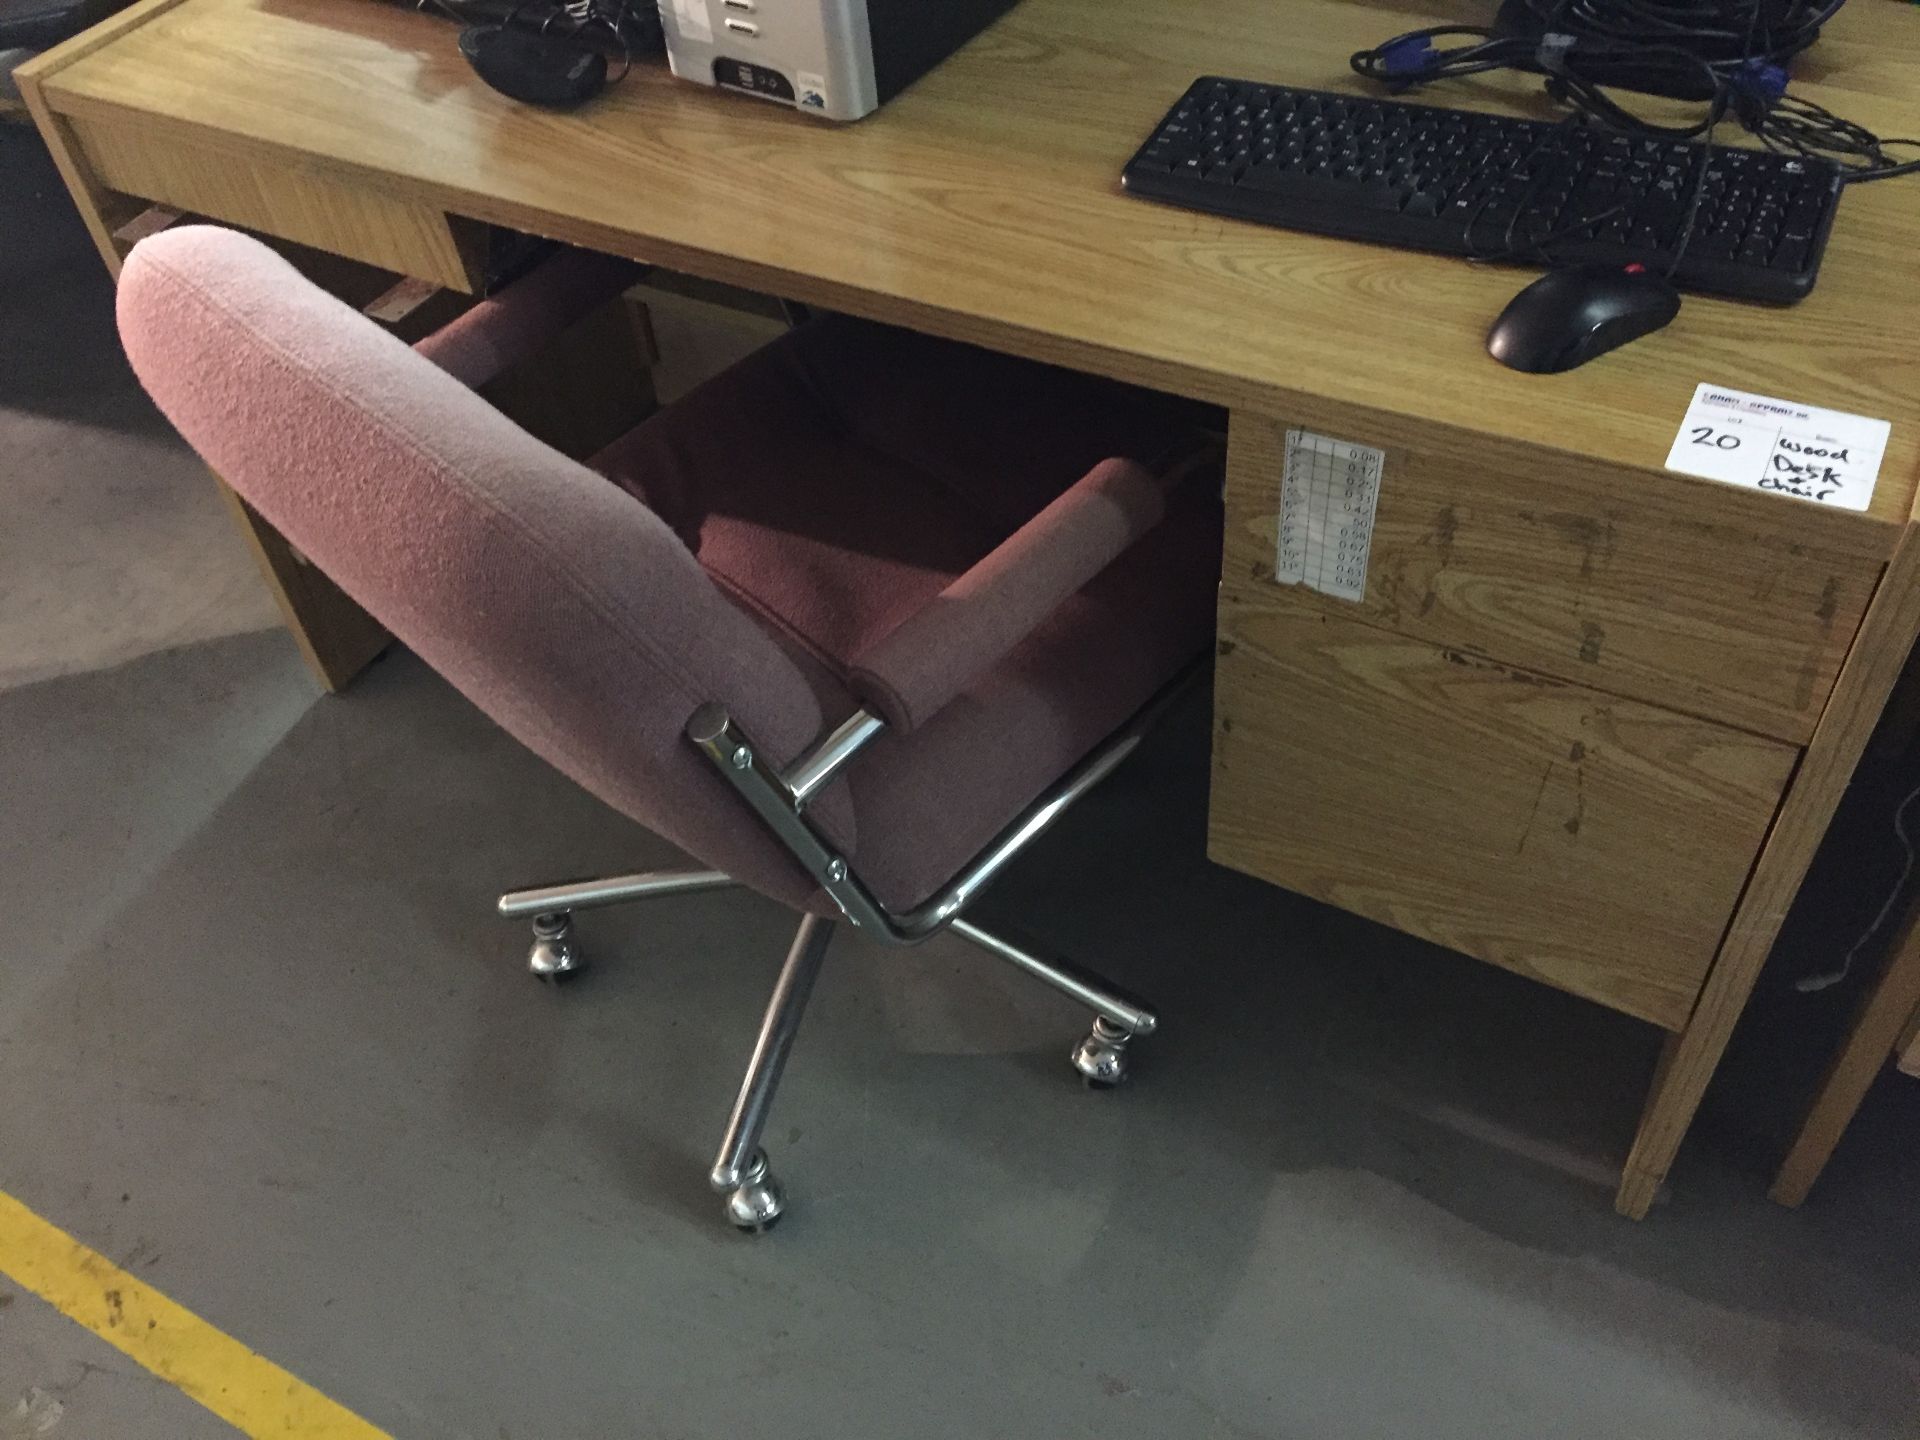 WOOD DESK - 1PC, FABRIC ROLLING OFFICE CHAIR - 1PC